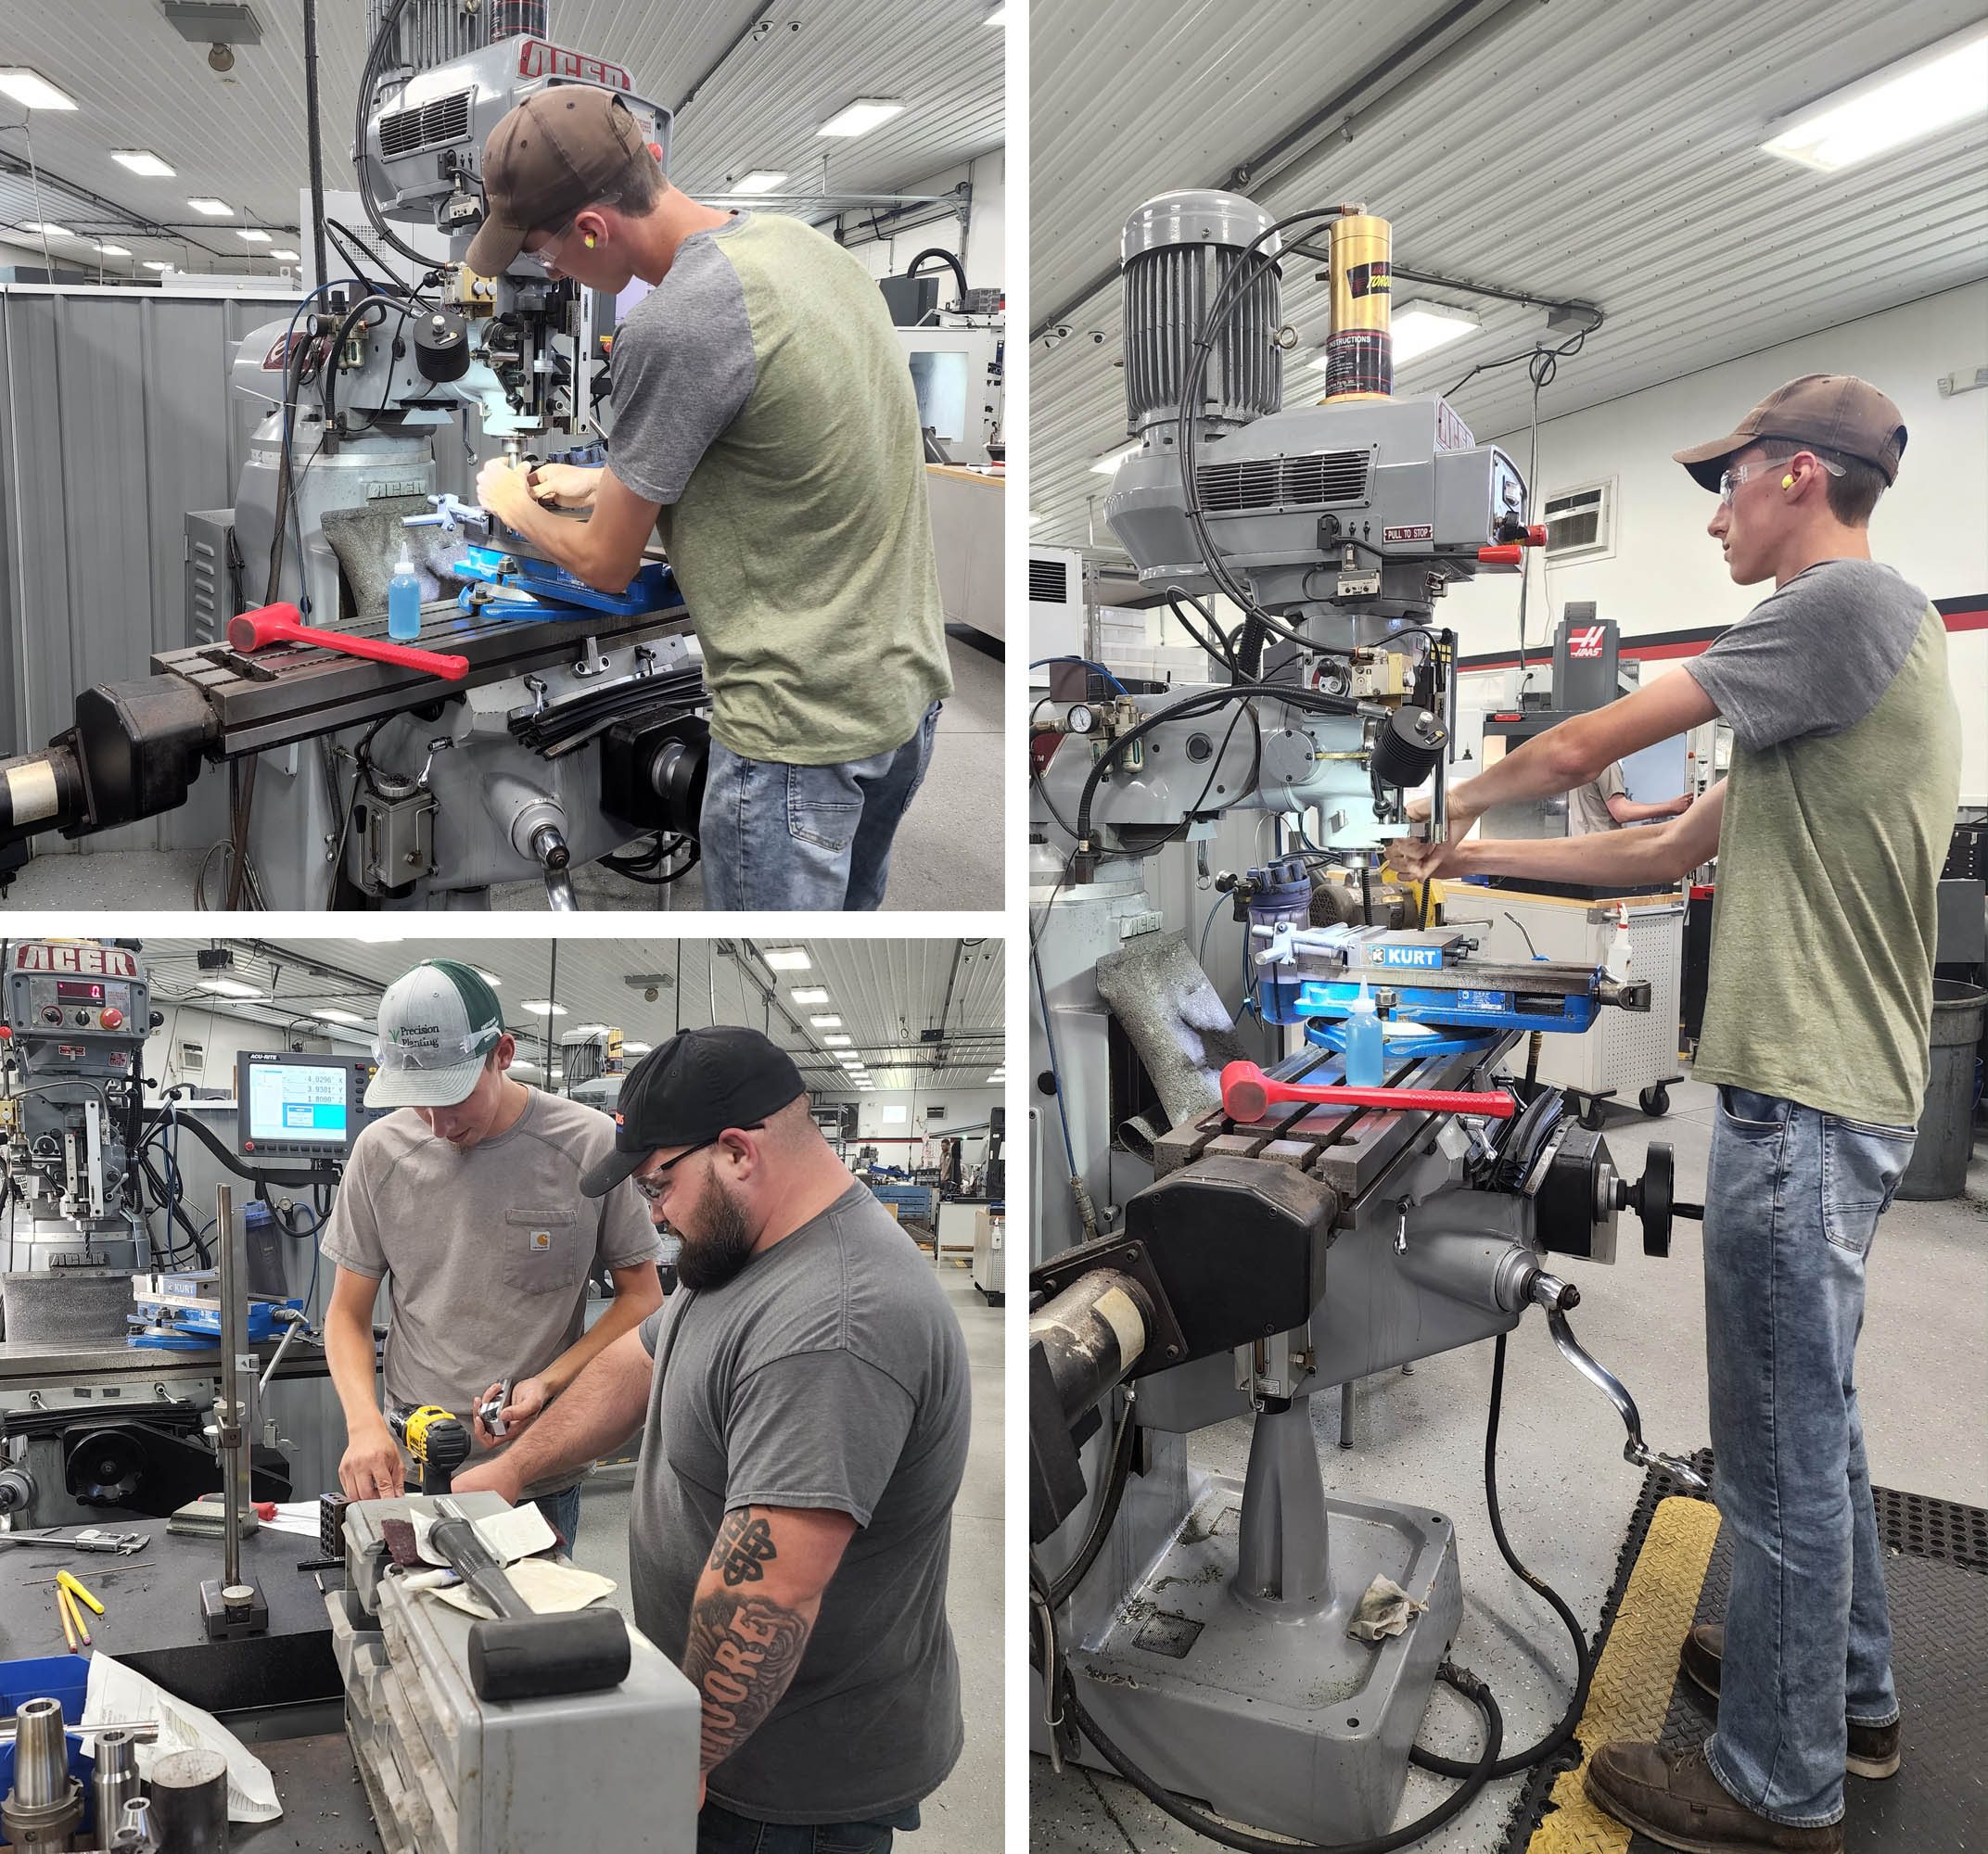 Apprentices work on equipment at Curbco